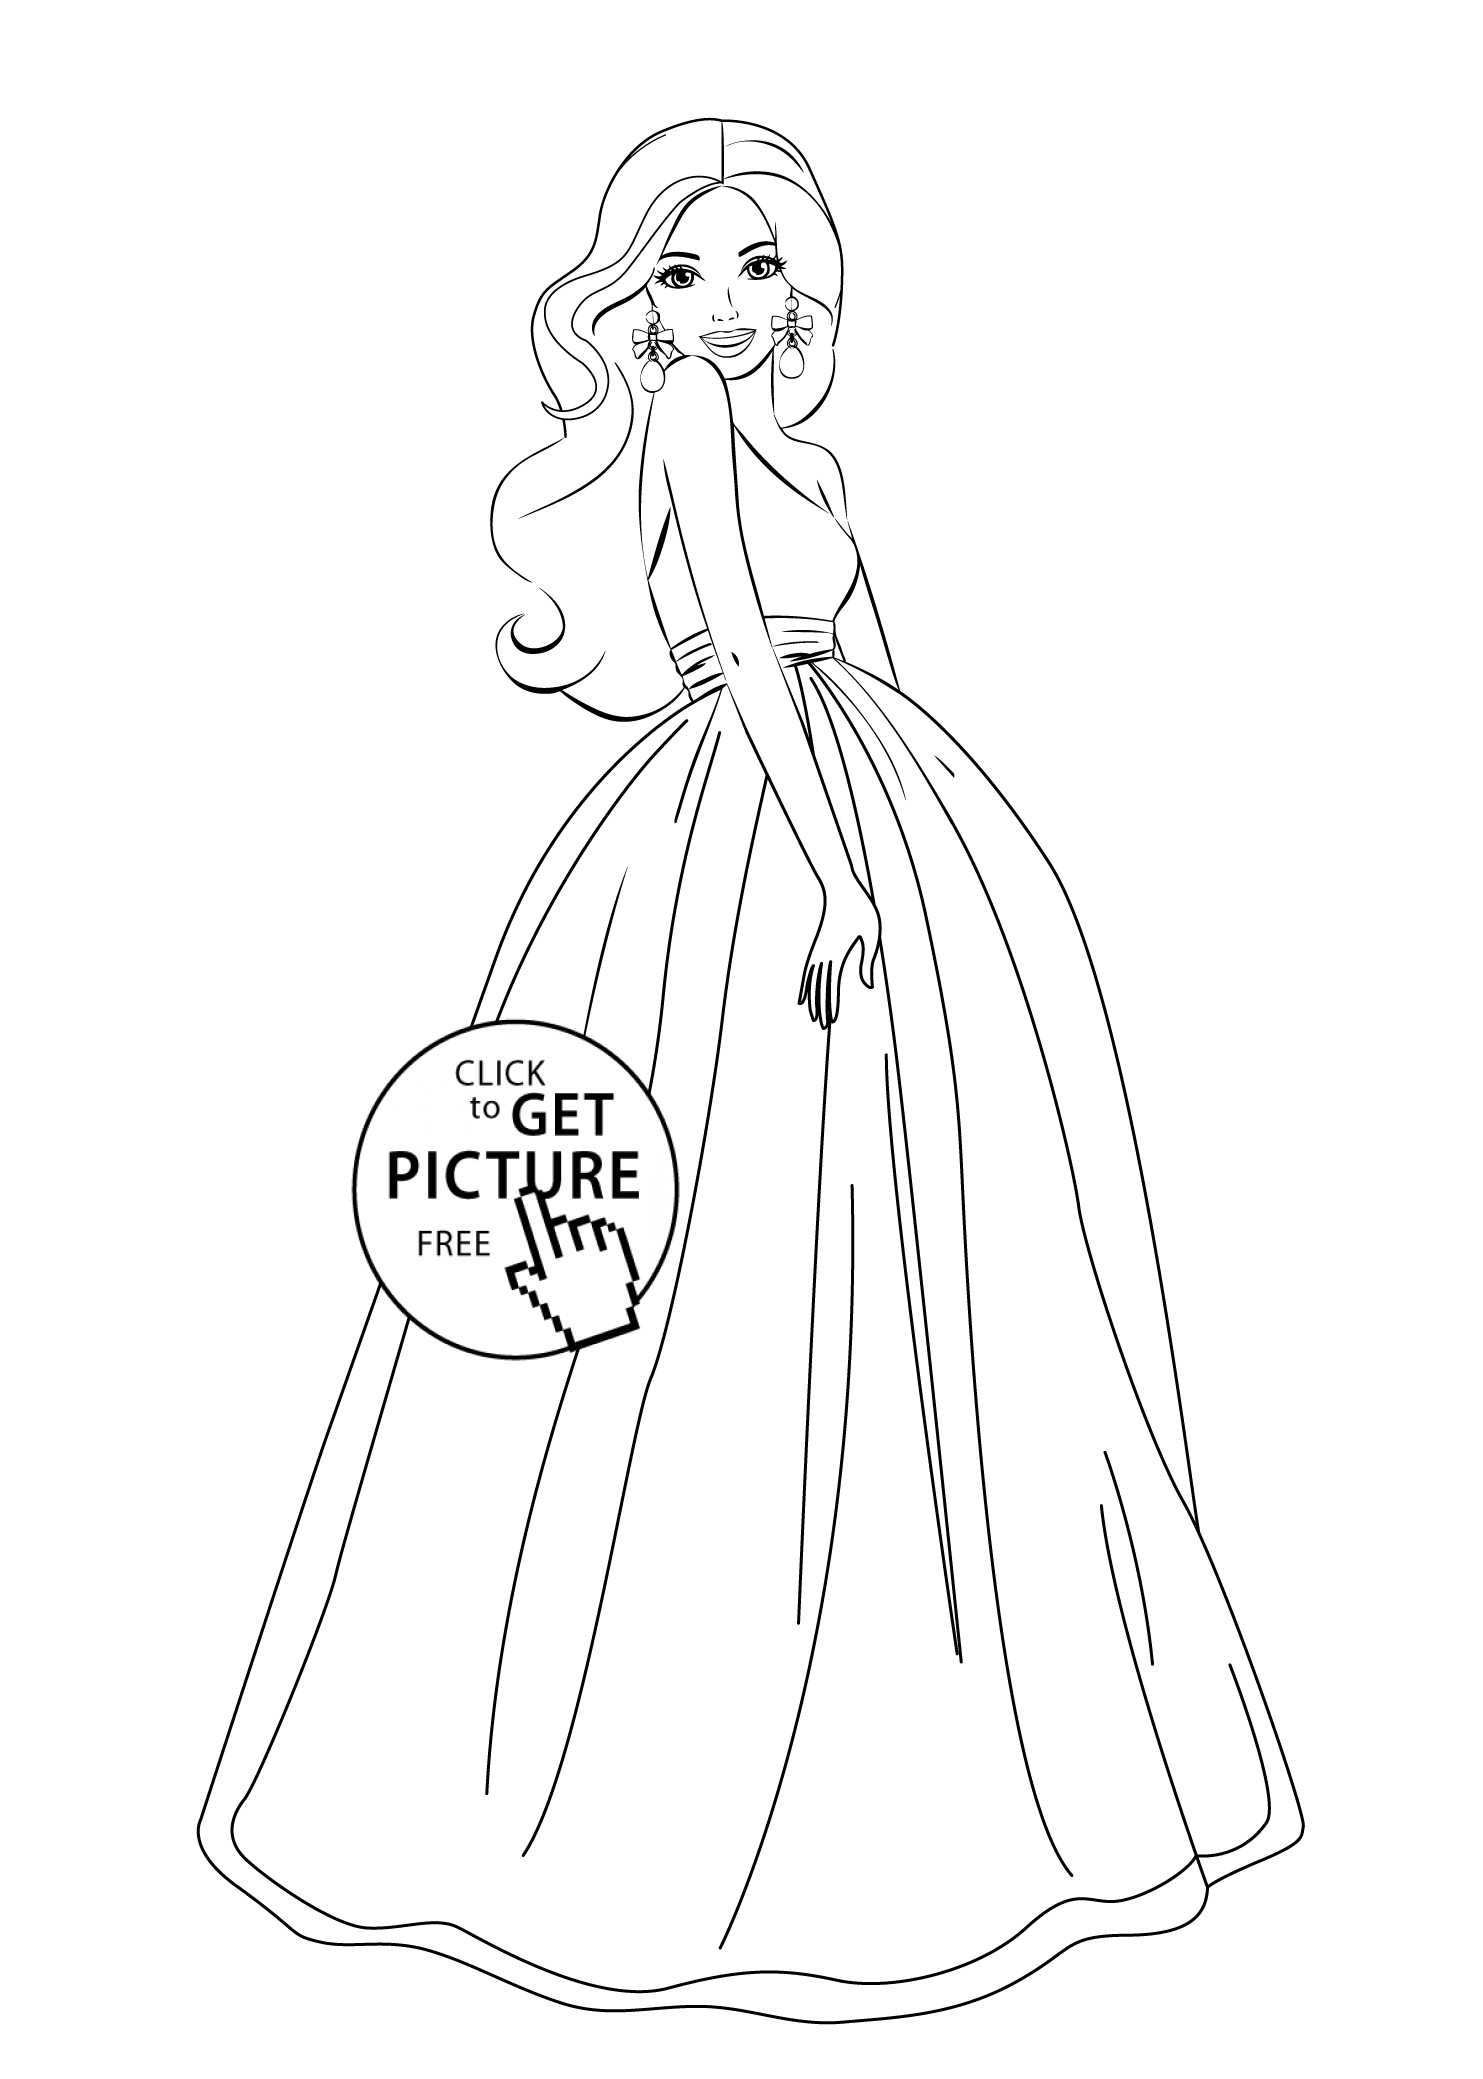 Barbie Coloring Pages For Girls
 Barbie coloring pages for girls free printable